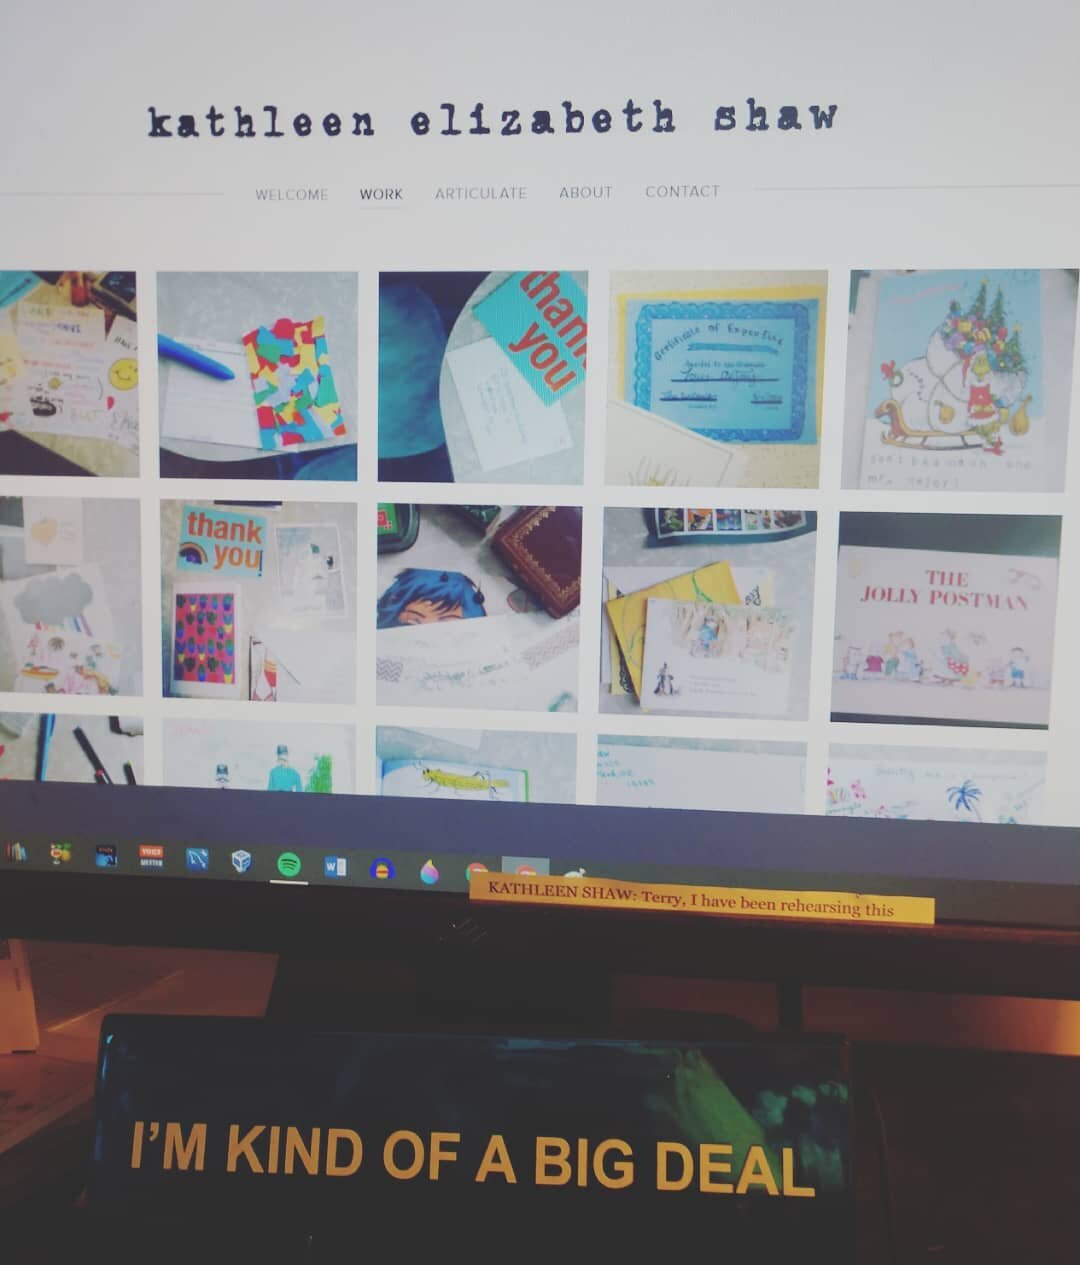 All my #365DaysOfLetters pictures are posted together on my website: kathleenelizabethshaw.com so go check it out!

#365DaysOfLetters #SaveTheUSPS #I'mKindOfABigDeal #TerryGross #KathleenElizabethShaw